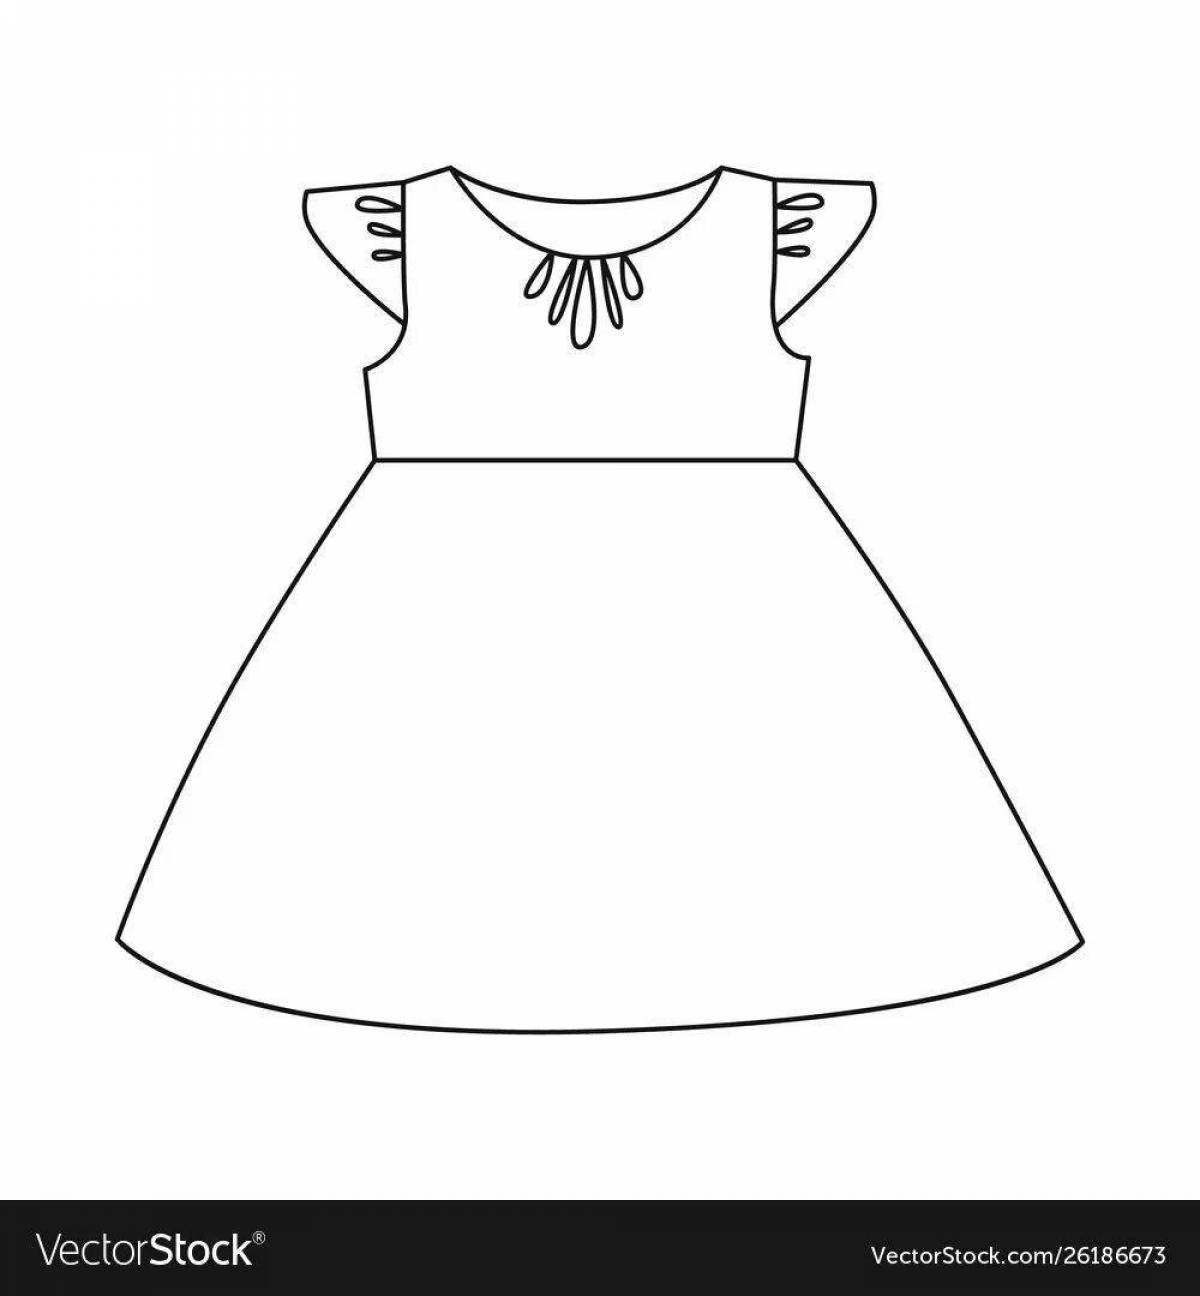 Adorable doll coloring dress for 4-5 year olds